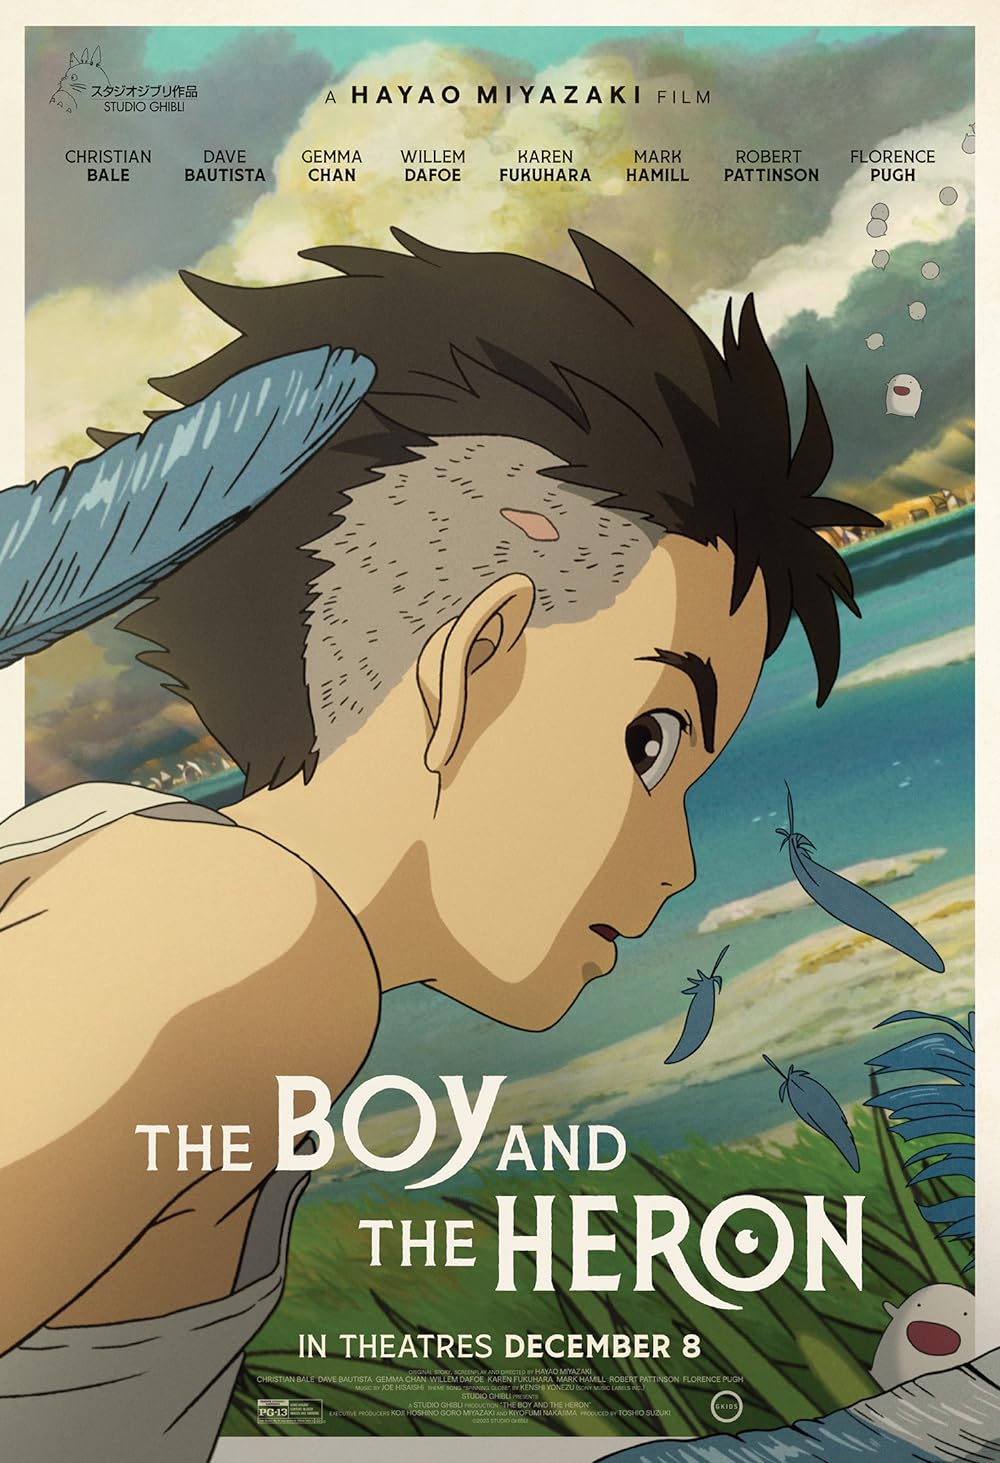 Reel Talk – “The Boy and the Heron”